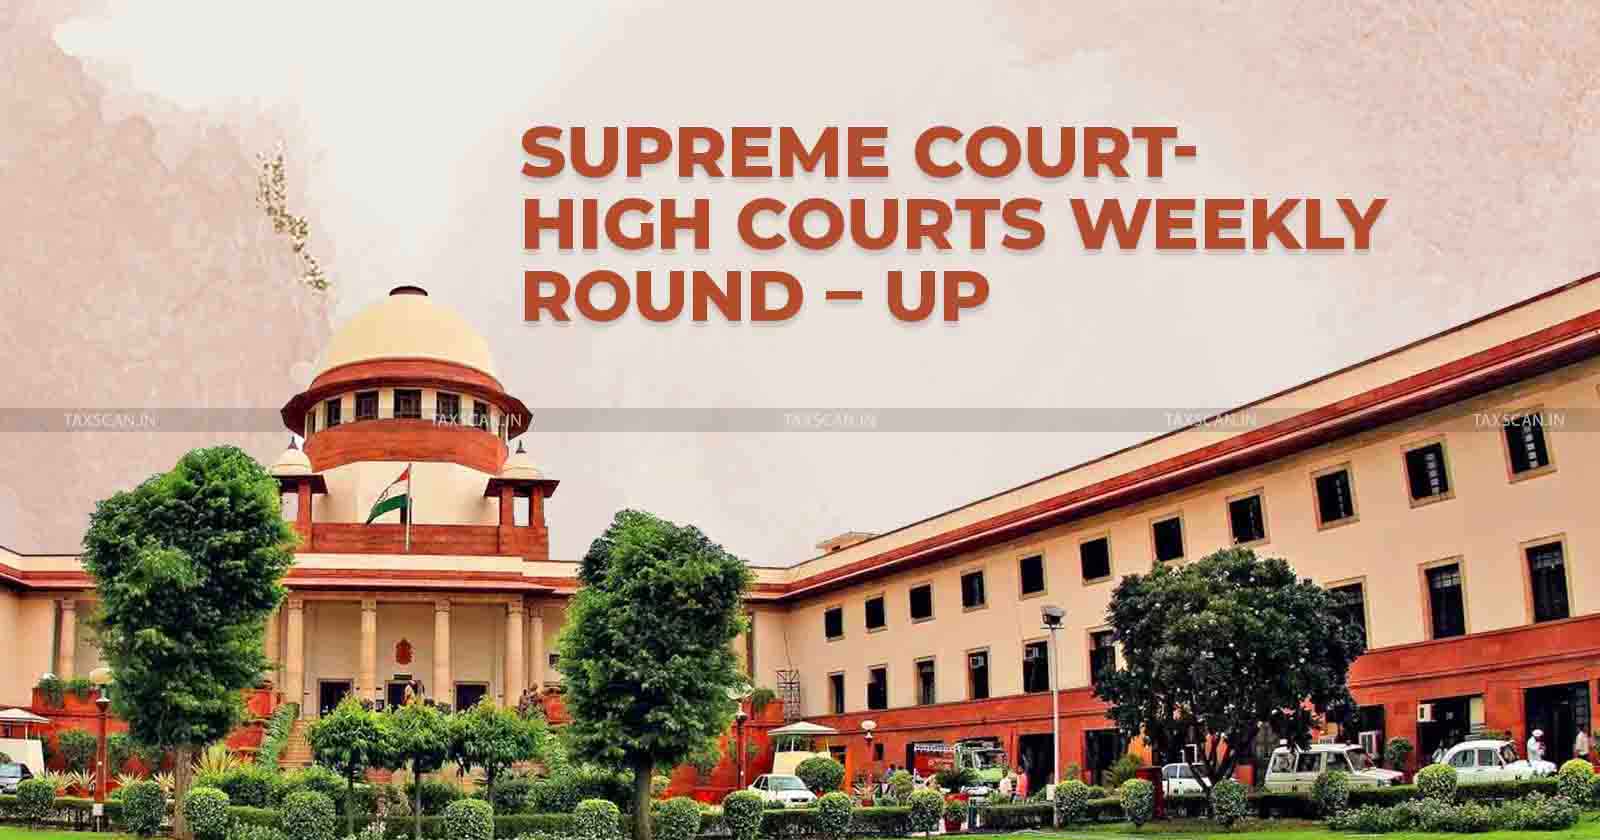 Supreme-Court-and-High-Court-Weekly-Round-Up-Supreme-Court-High-Court-Weekly-Round-Up-Taxscan